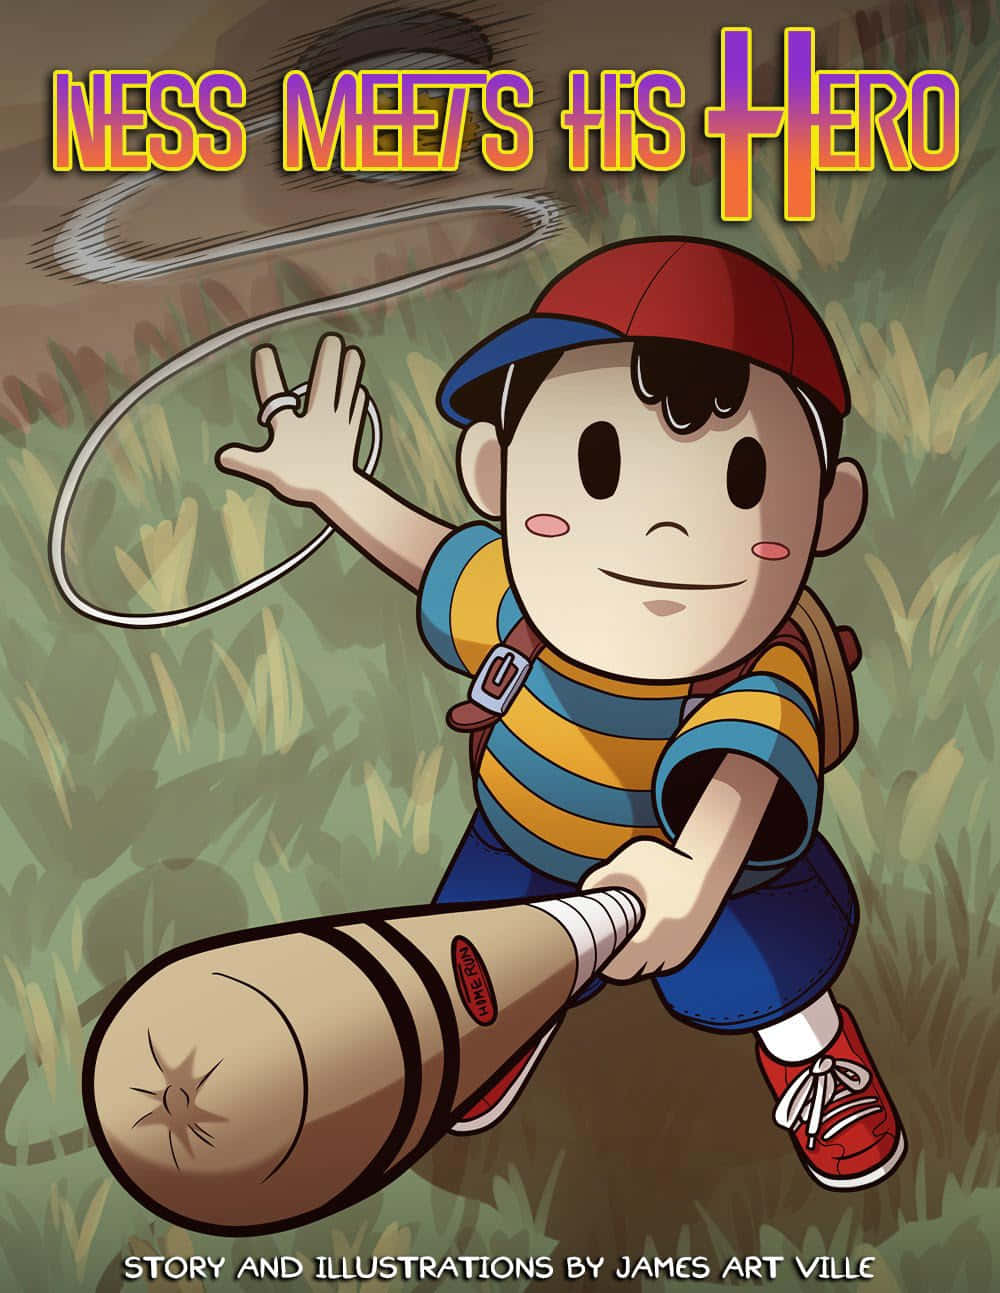 Explore the world of Earthbound